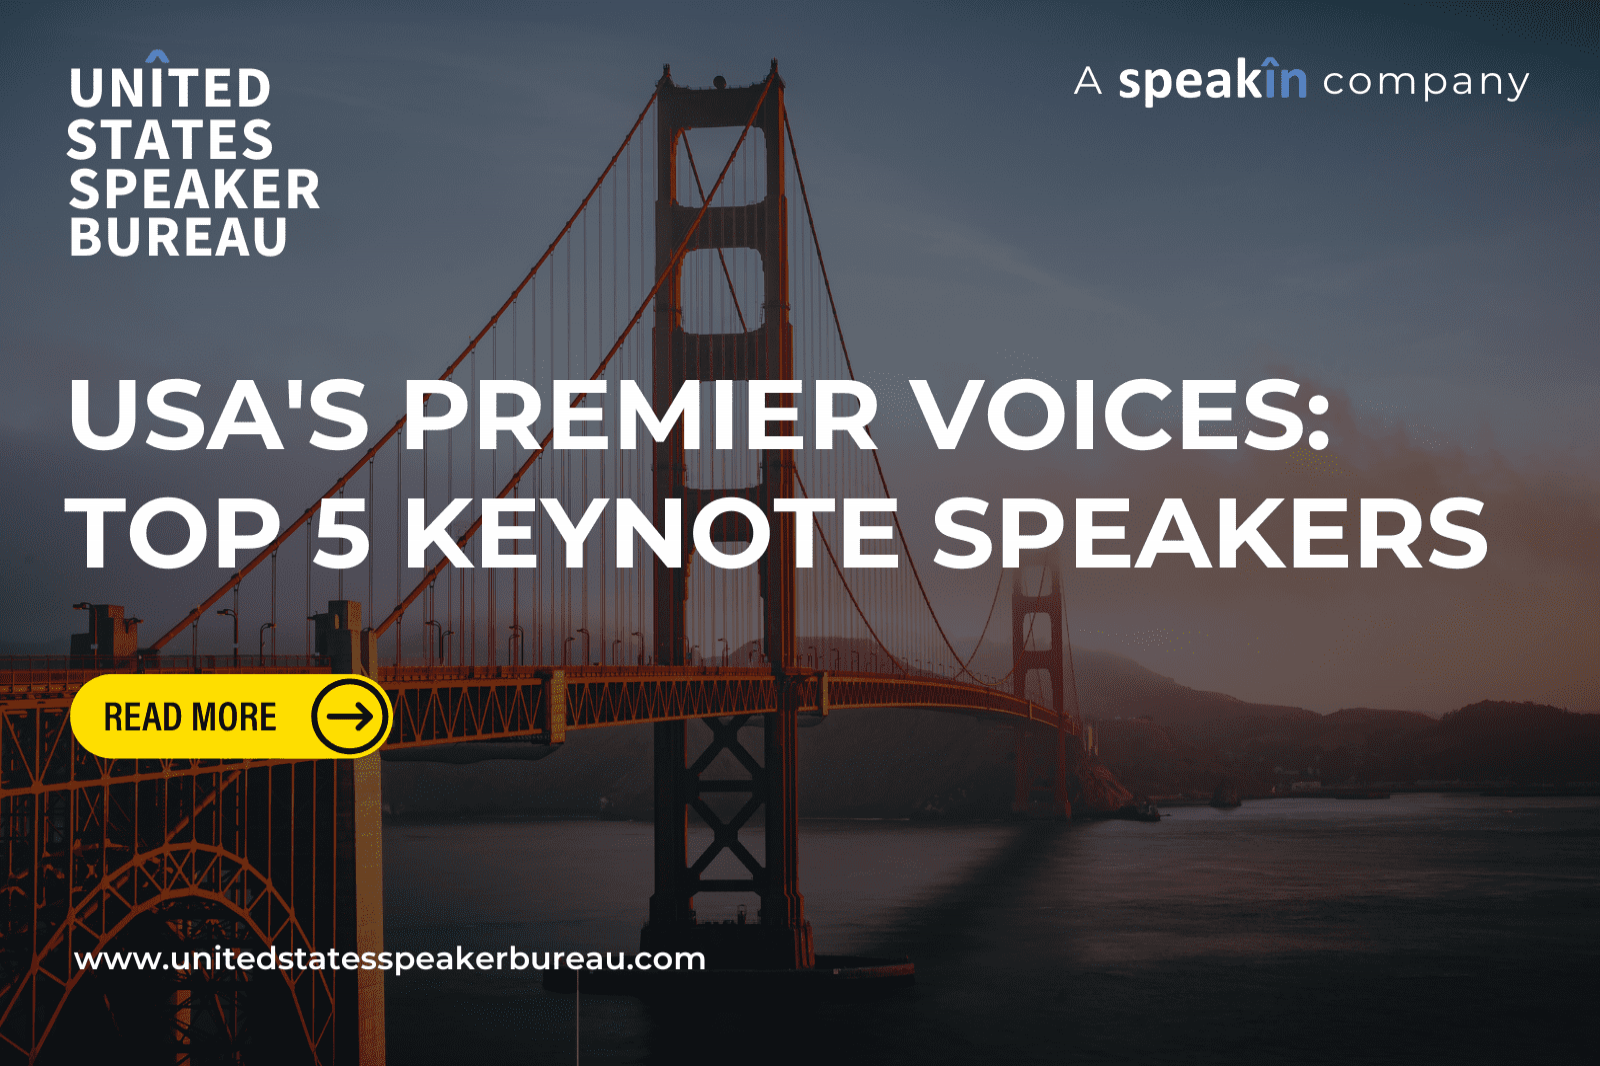 USA's Premier Voices: Highlighting the Top 5 Keynote Speakers